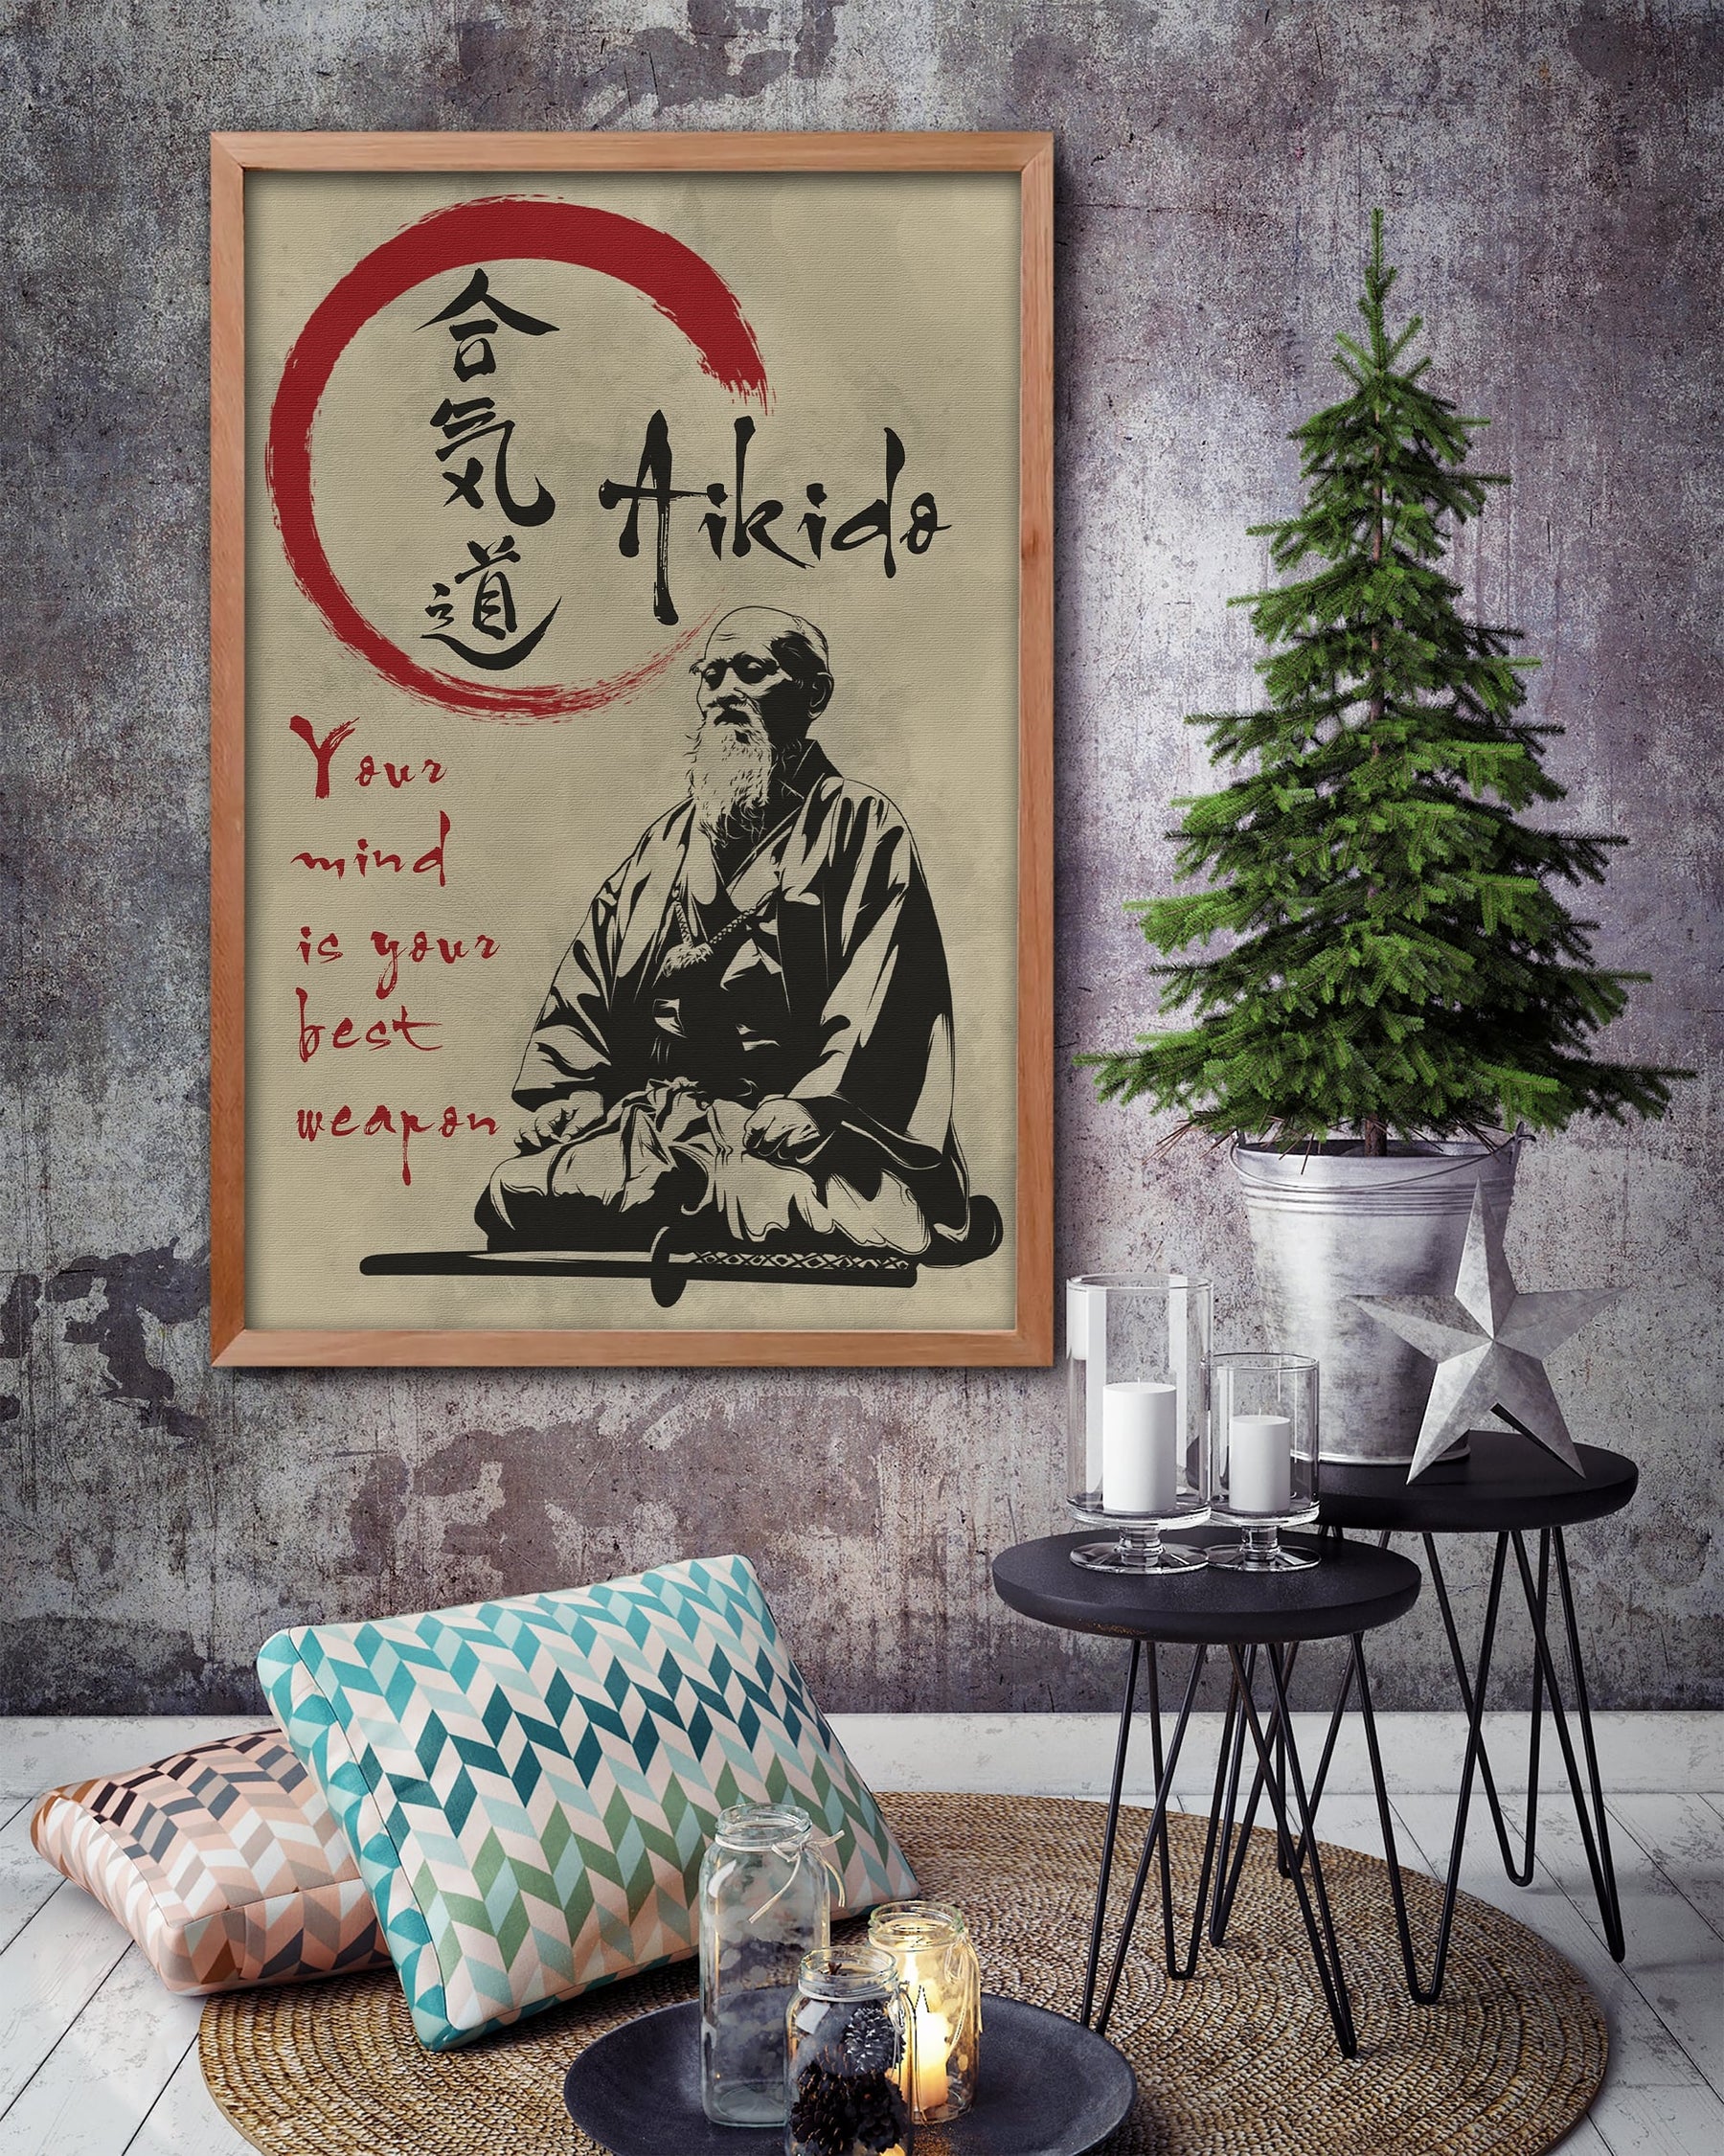 AI003 - Your Mind Is Your Best Weapon - Morihei Ueshiba - Vertical Poster - Vertical Canvas - Aikido Poster